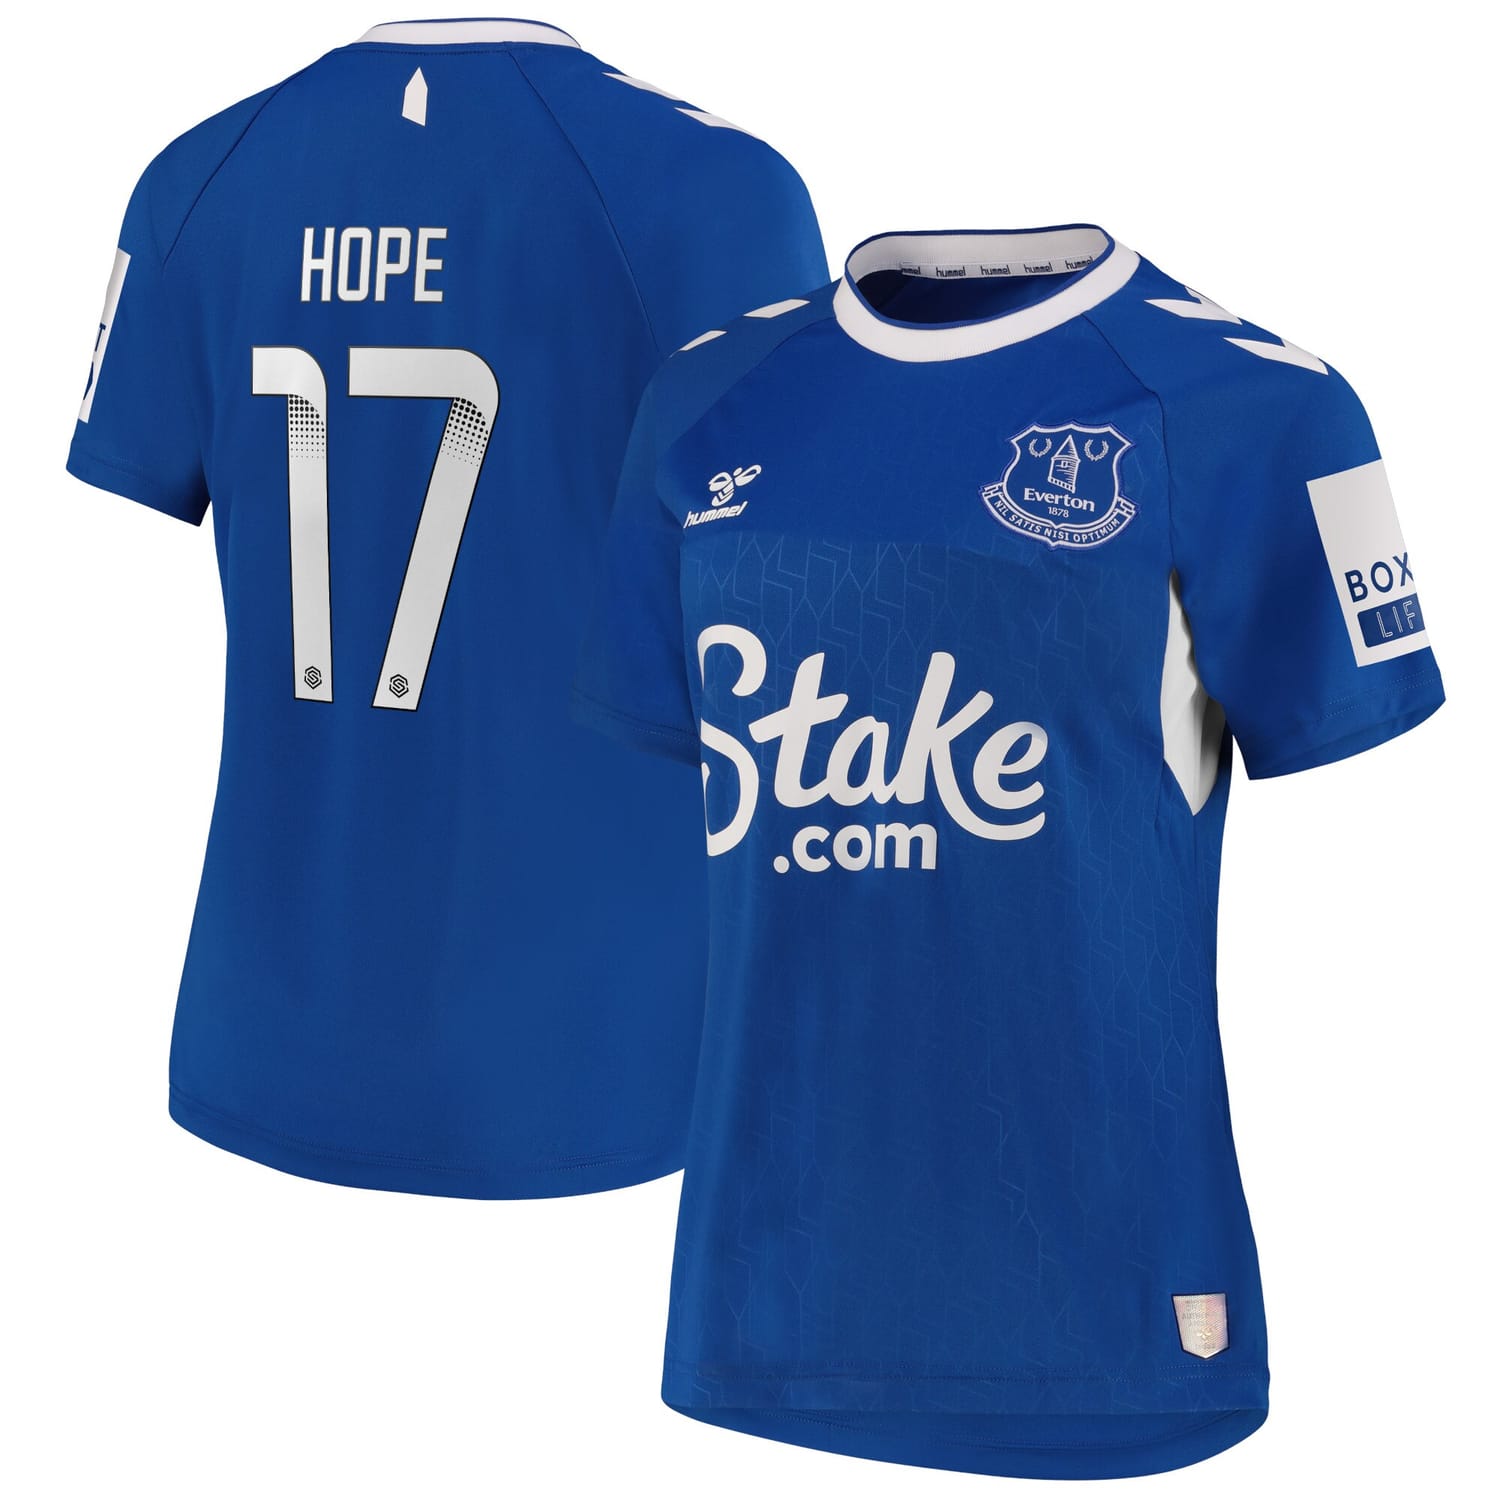 Premier League Everton Home WSL Jersey Shirt 2022-23 player Lucy Hope 17 printing for Women